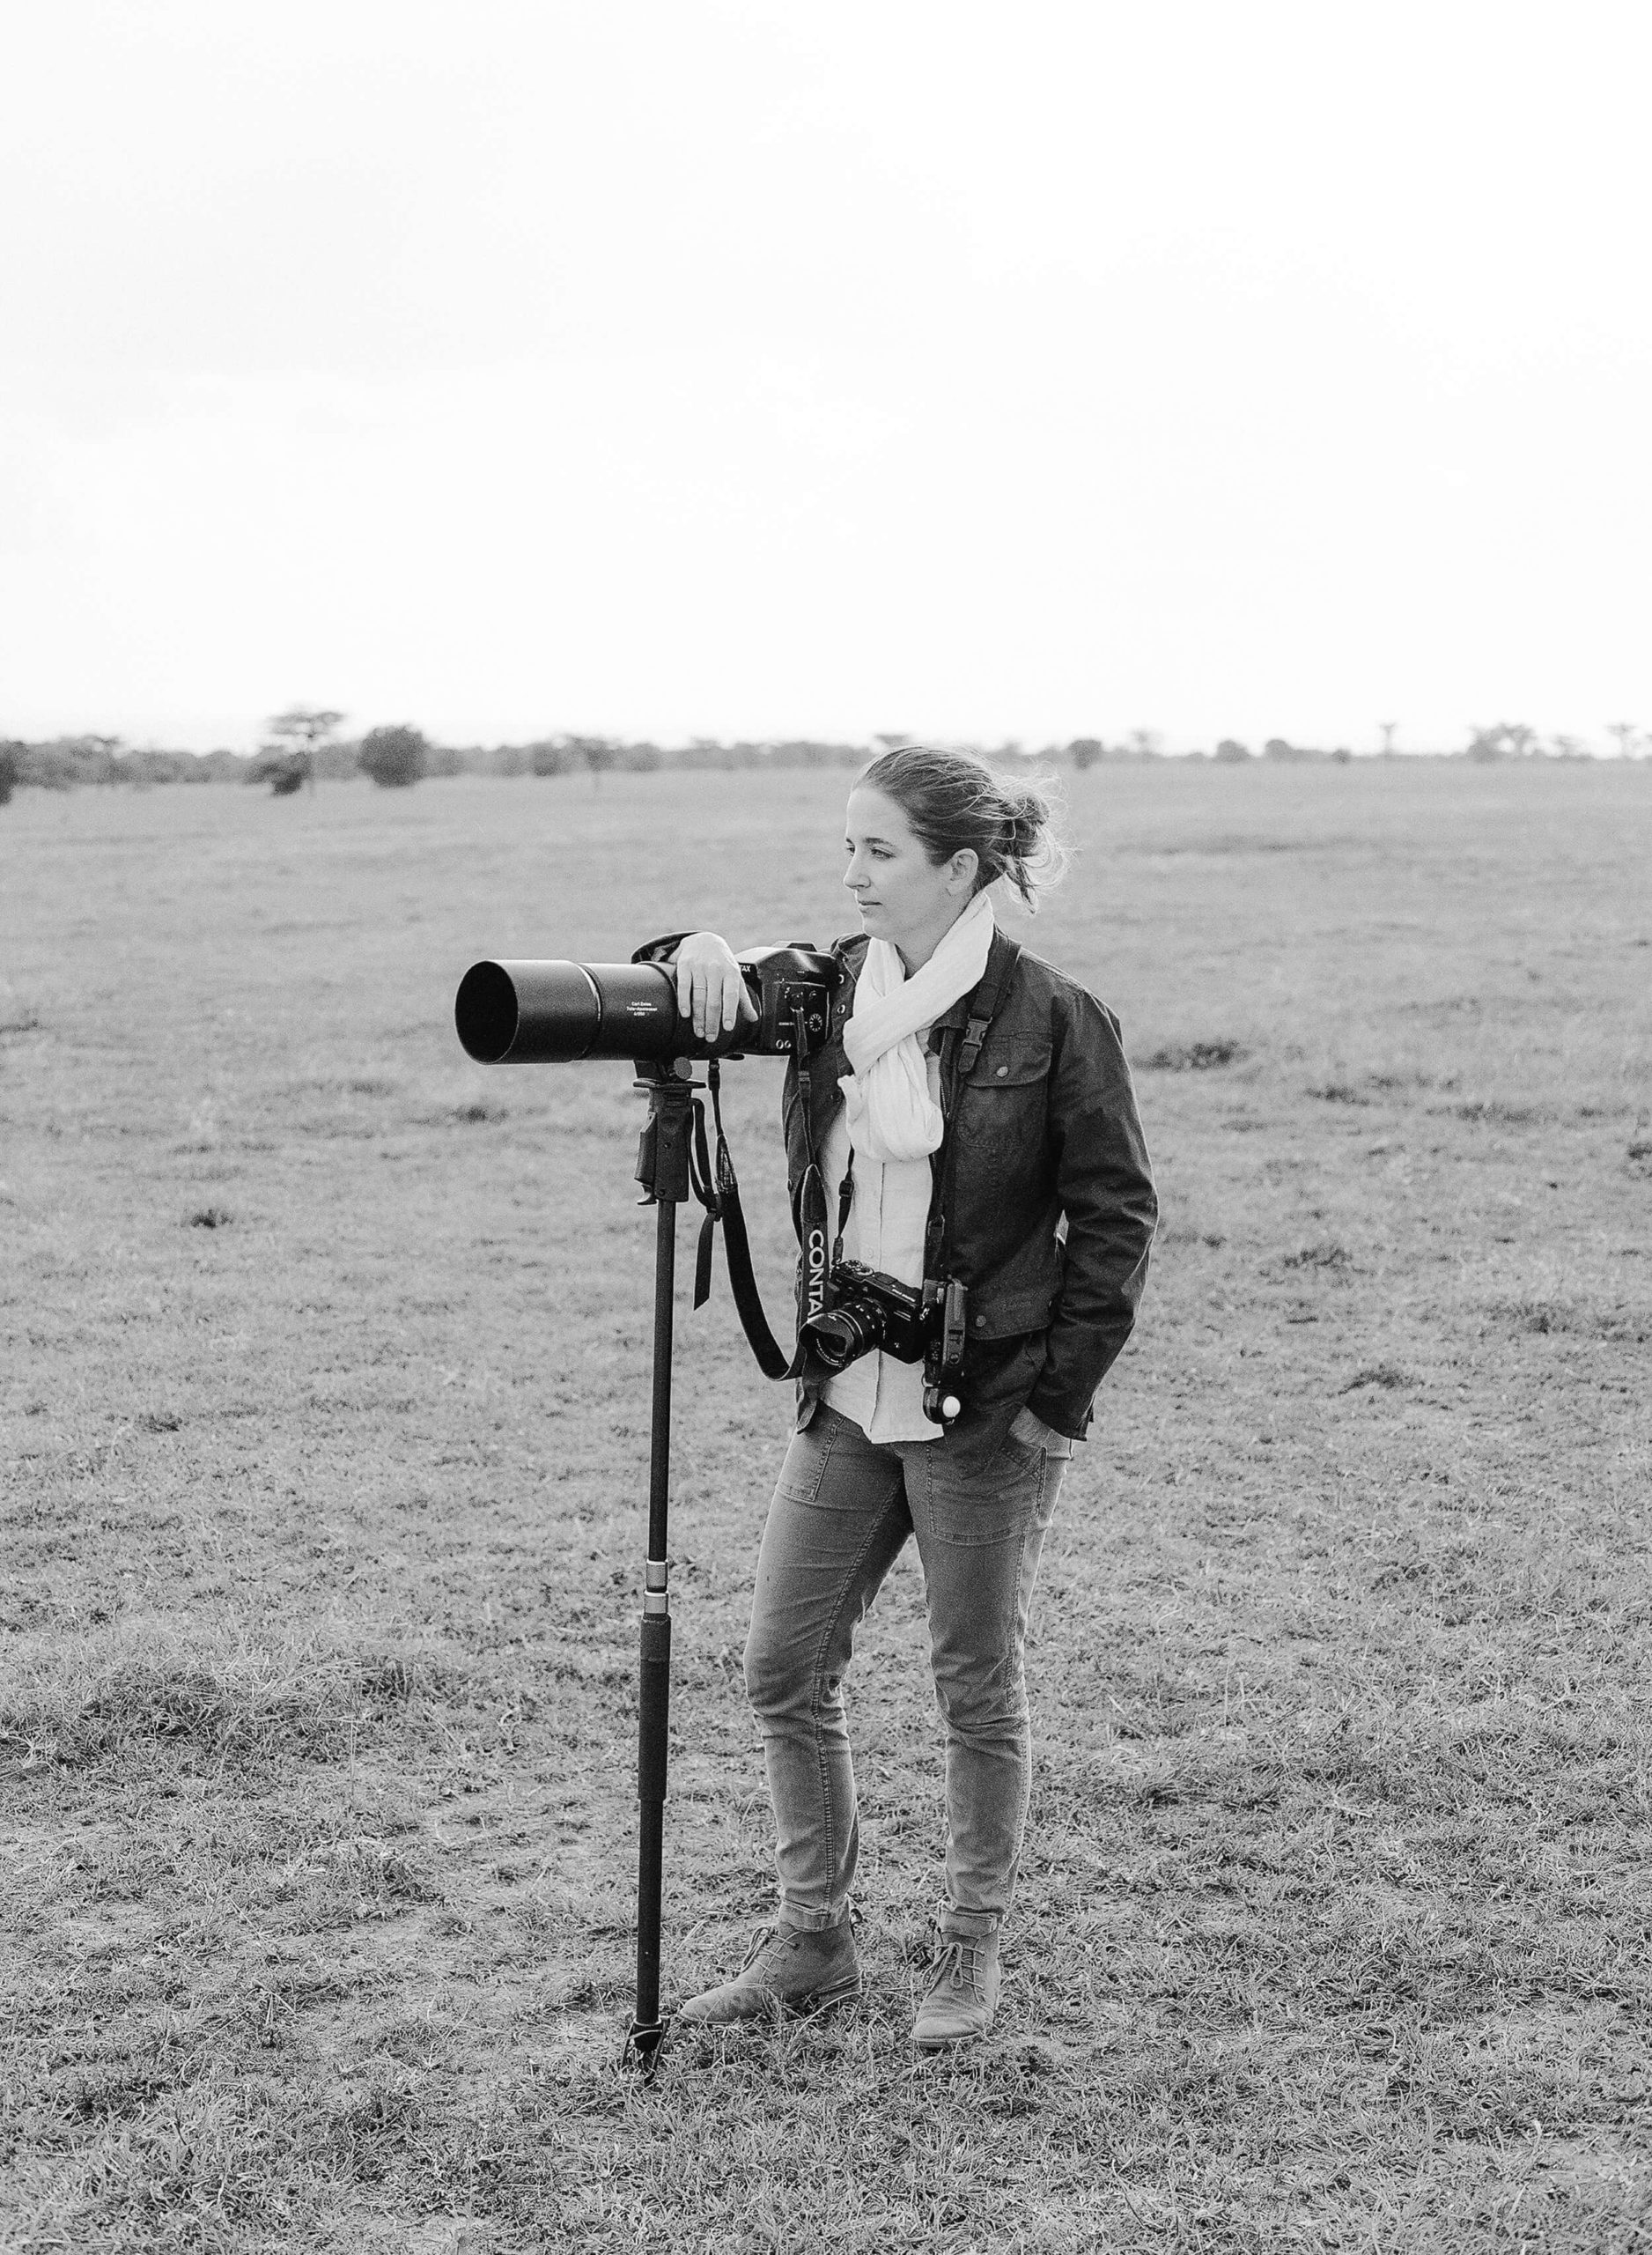 KT Merry uses her photography business for good to support African wildlife conservation